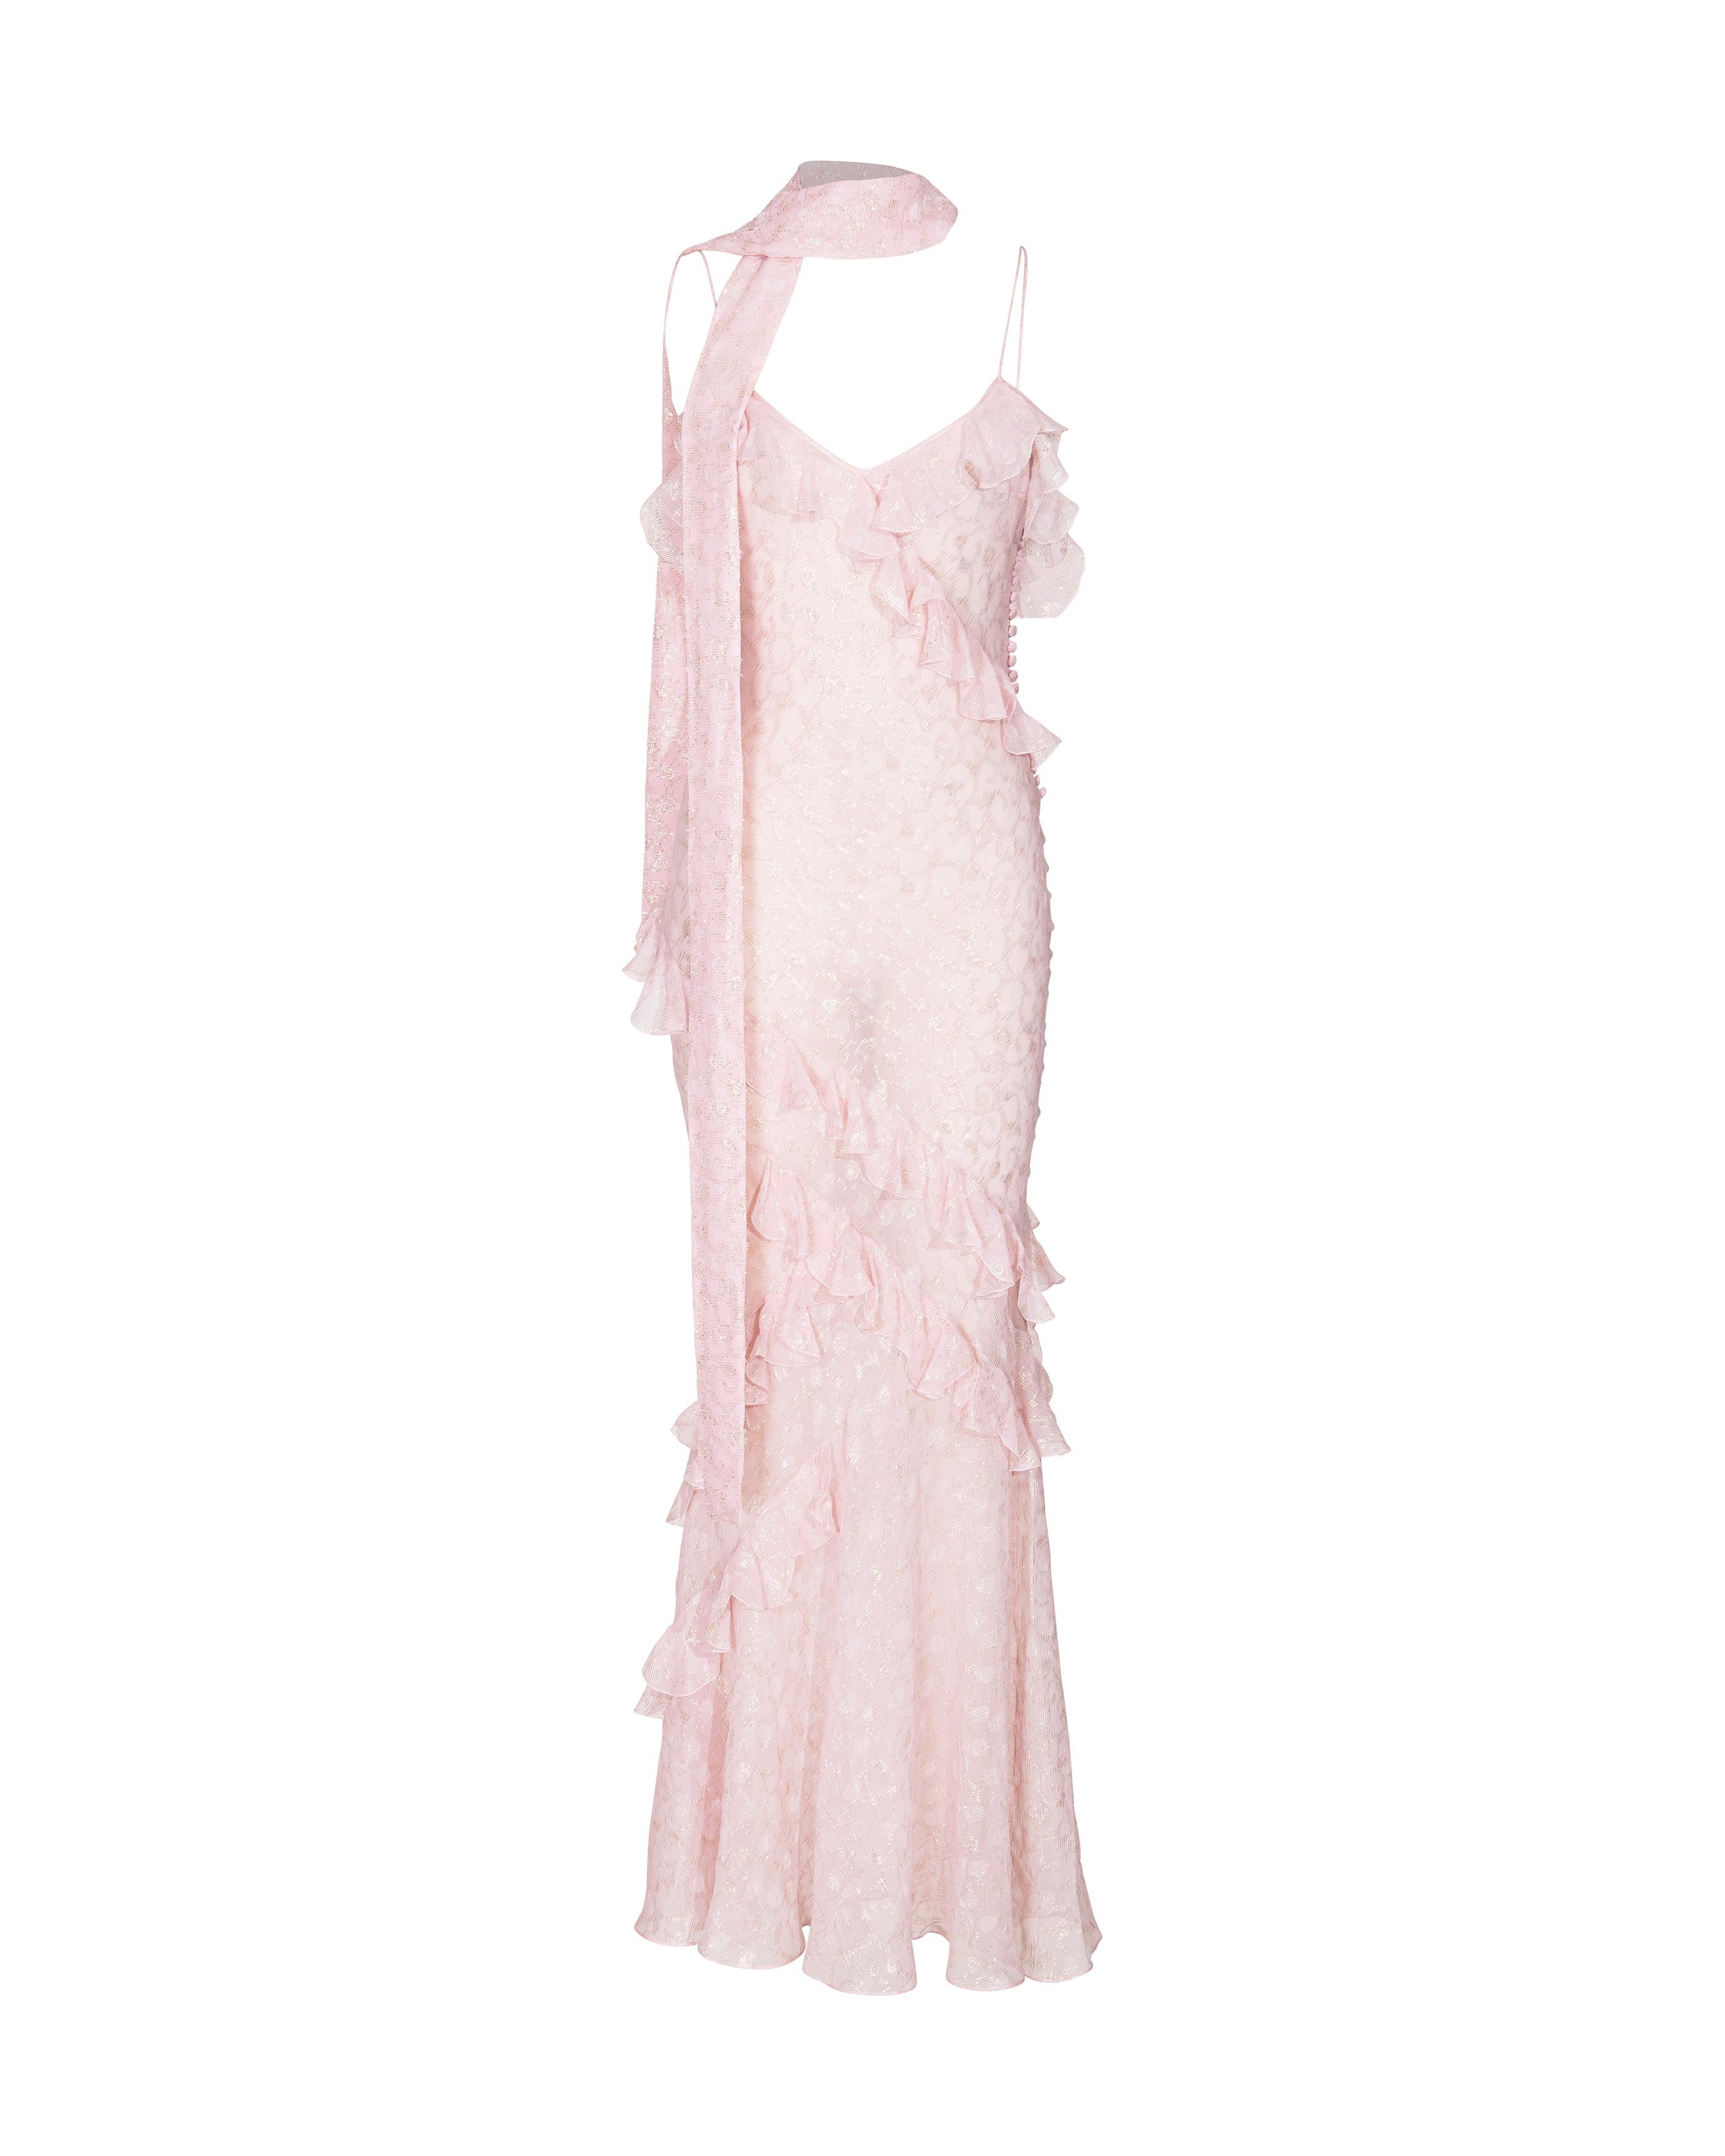 S/S 2004 Christian Dior by John Galliano Sheer Pink and Gold Ruffle Gown 8